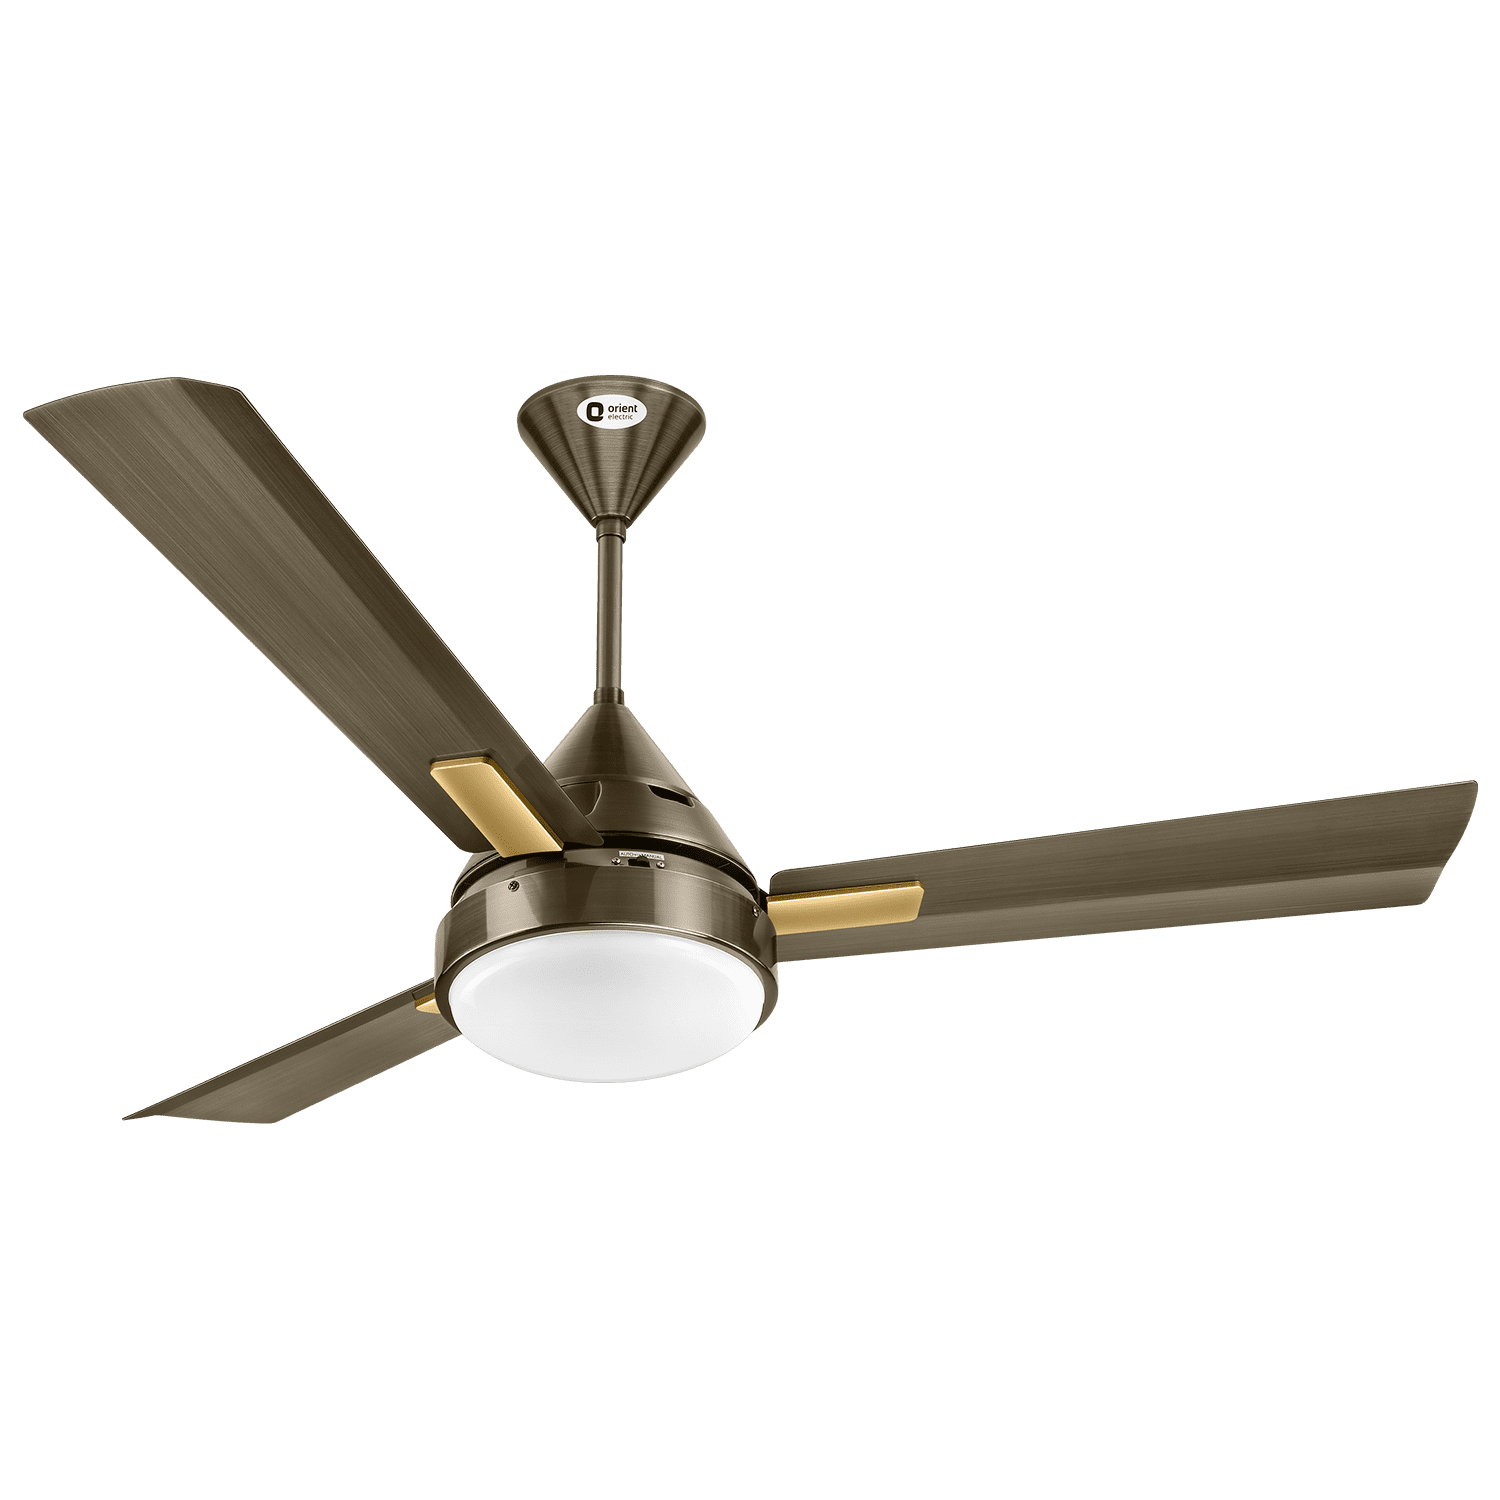 With Remote Underlight Ceiling Fan